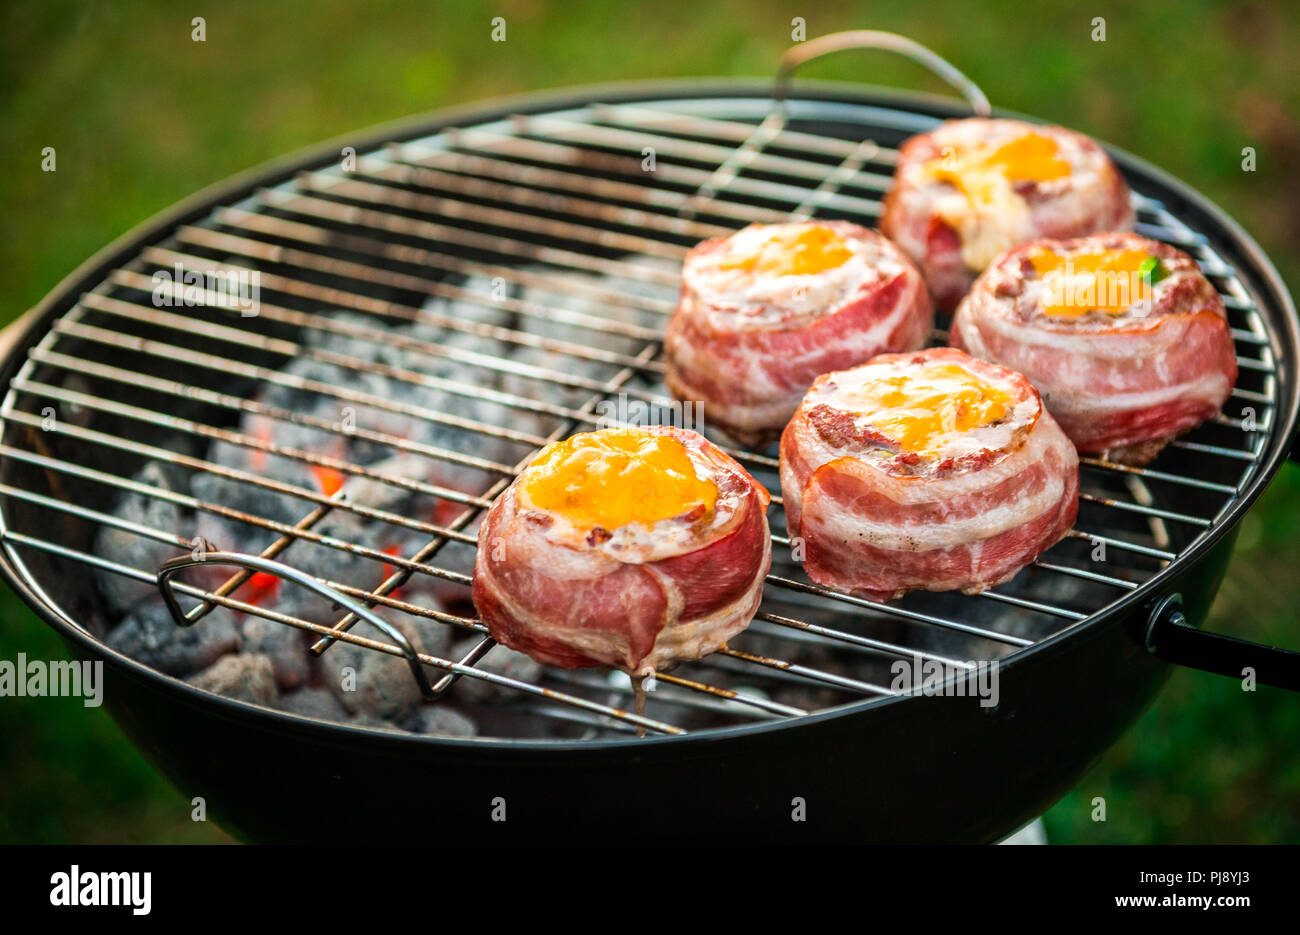 Making home made Beer Can Bacon Burgers on barbecue grill. Preparing  stuffed patties, wrapped in bacon and grilling on indirect heat in nature  at bac Stock Photo - Alamy